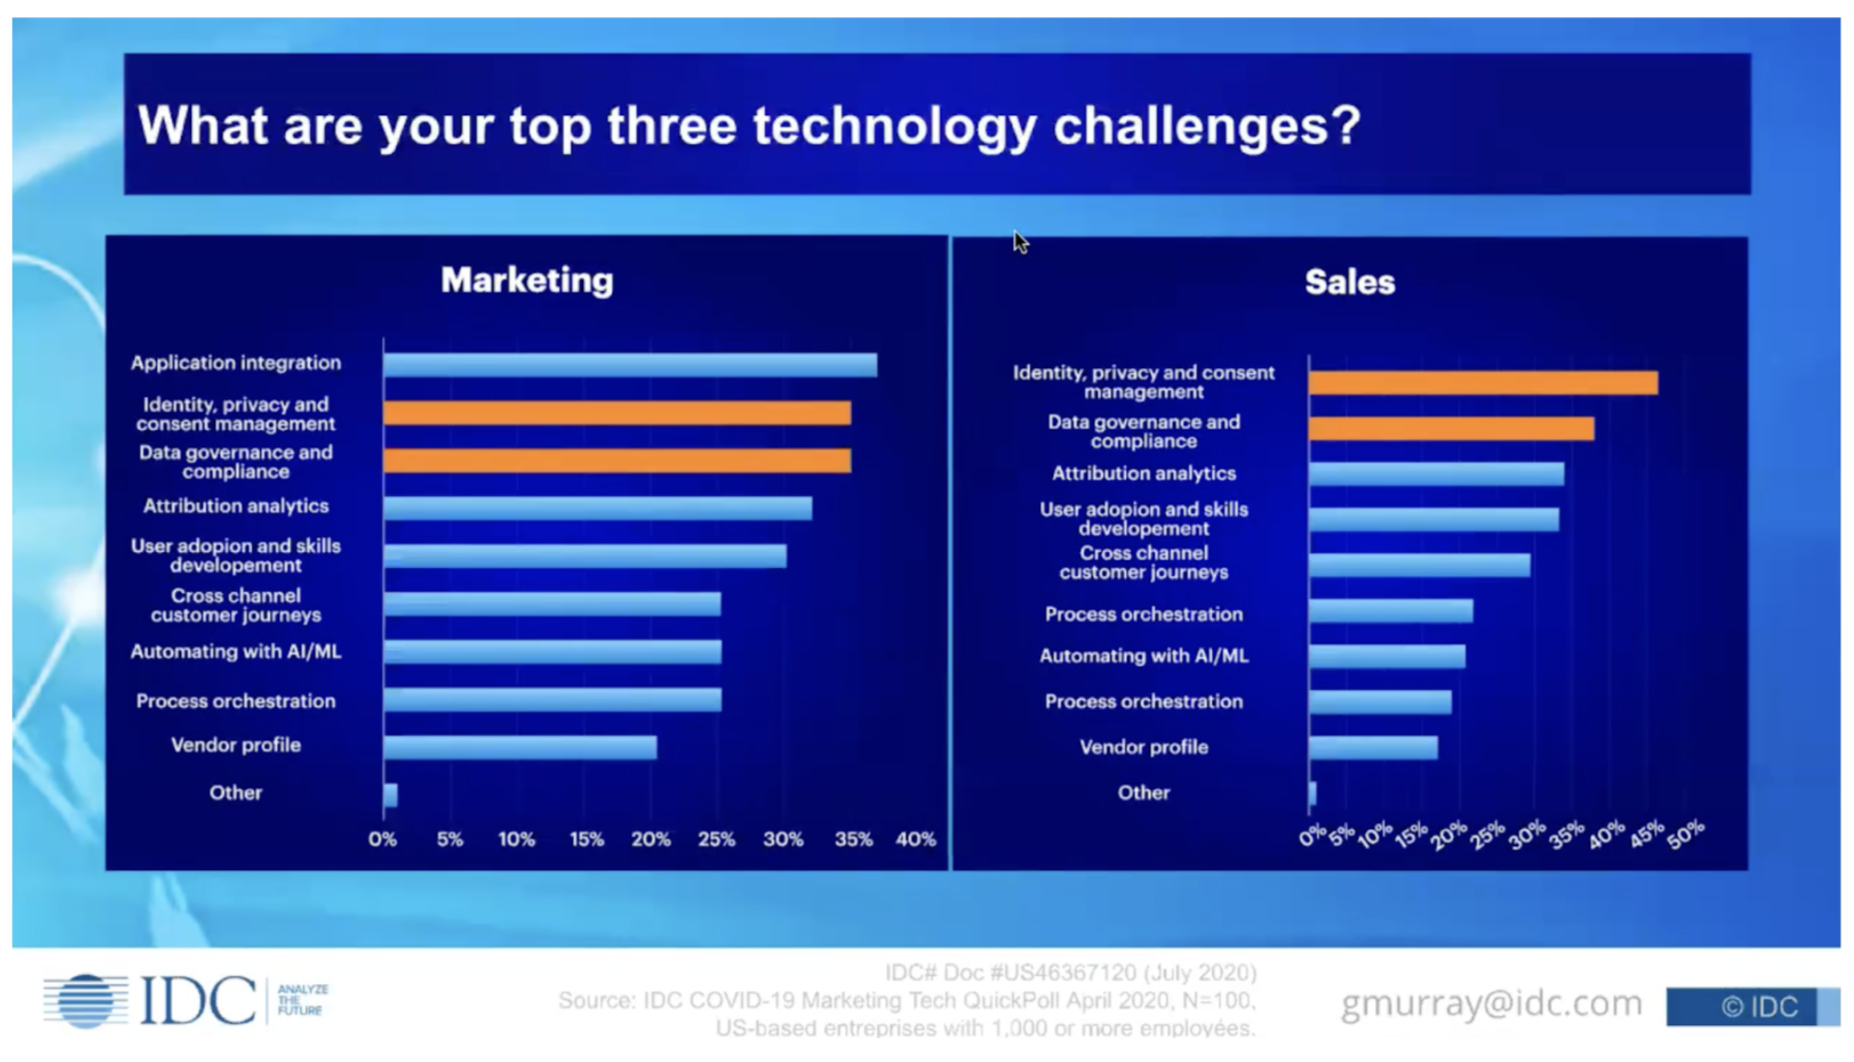 Technology challenges for sales and marketing